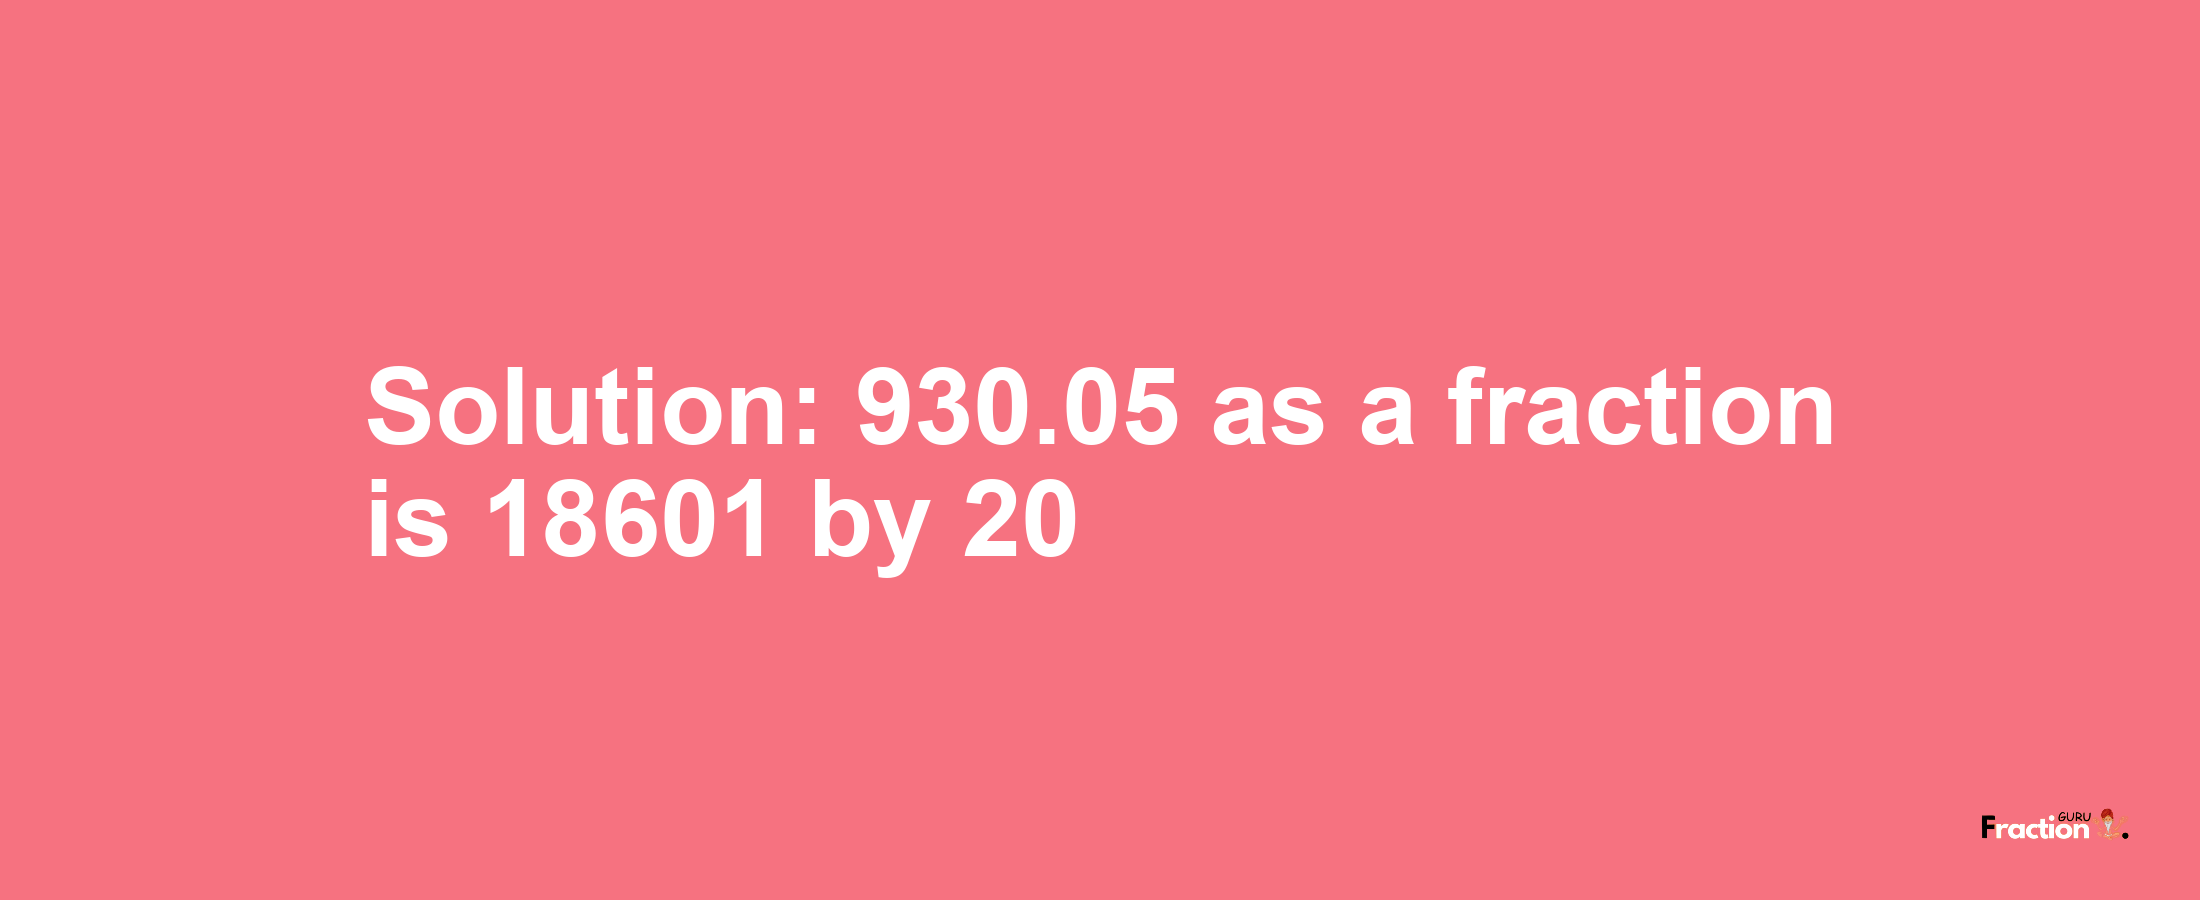 Solution:930.05 as a fraction is 18601/20